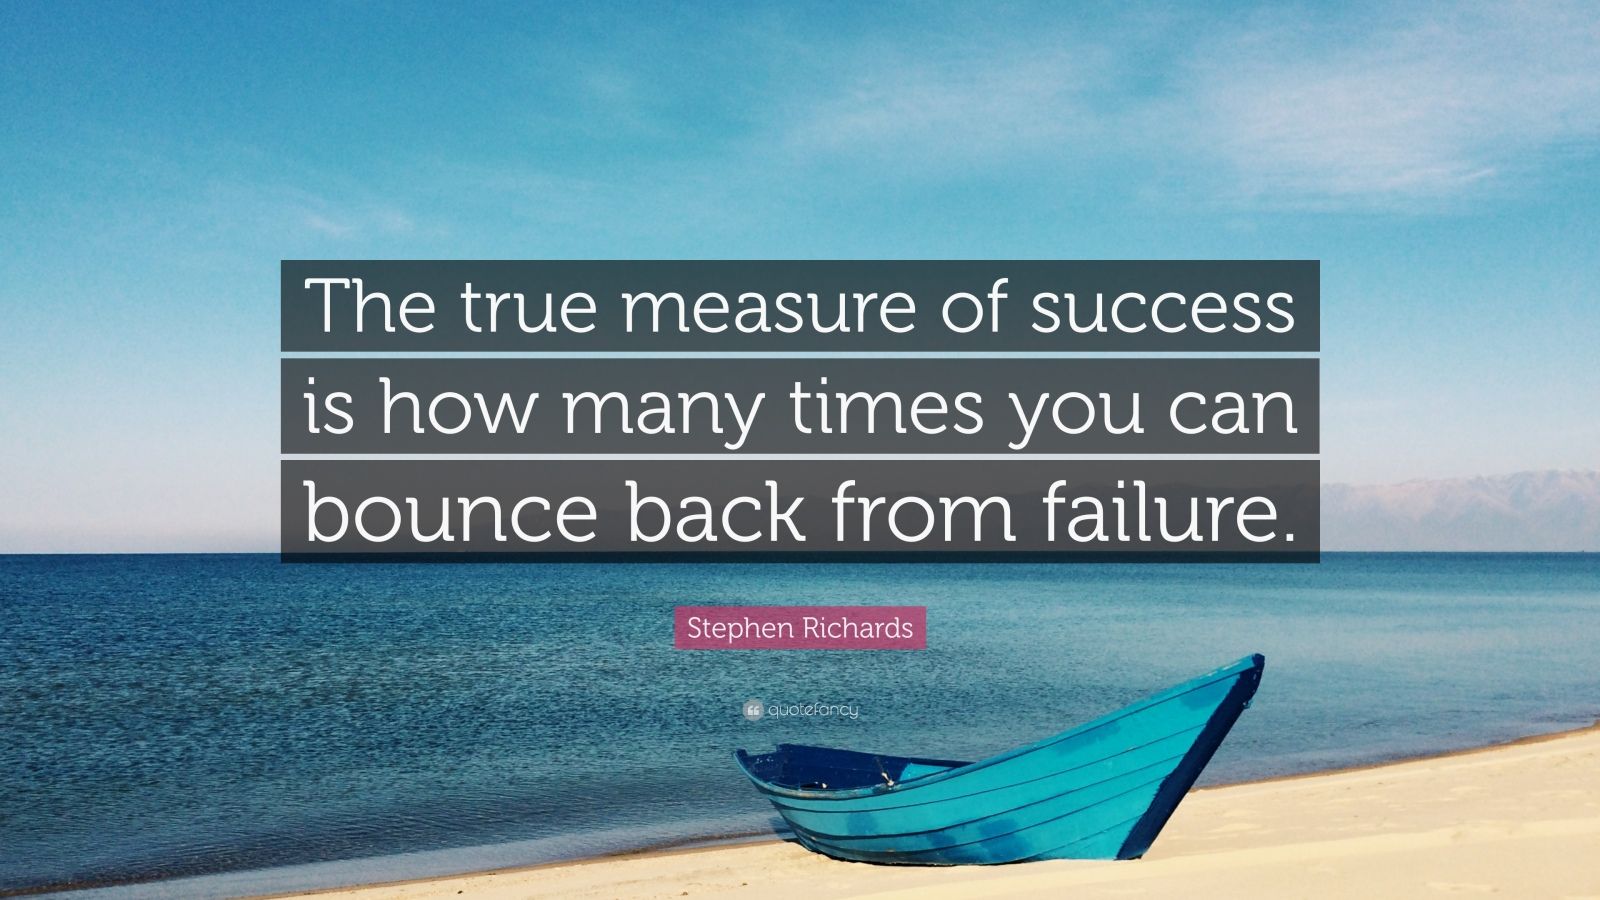 Stephen Richards Quote “The true measure of success is